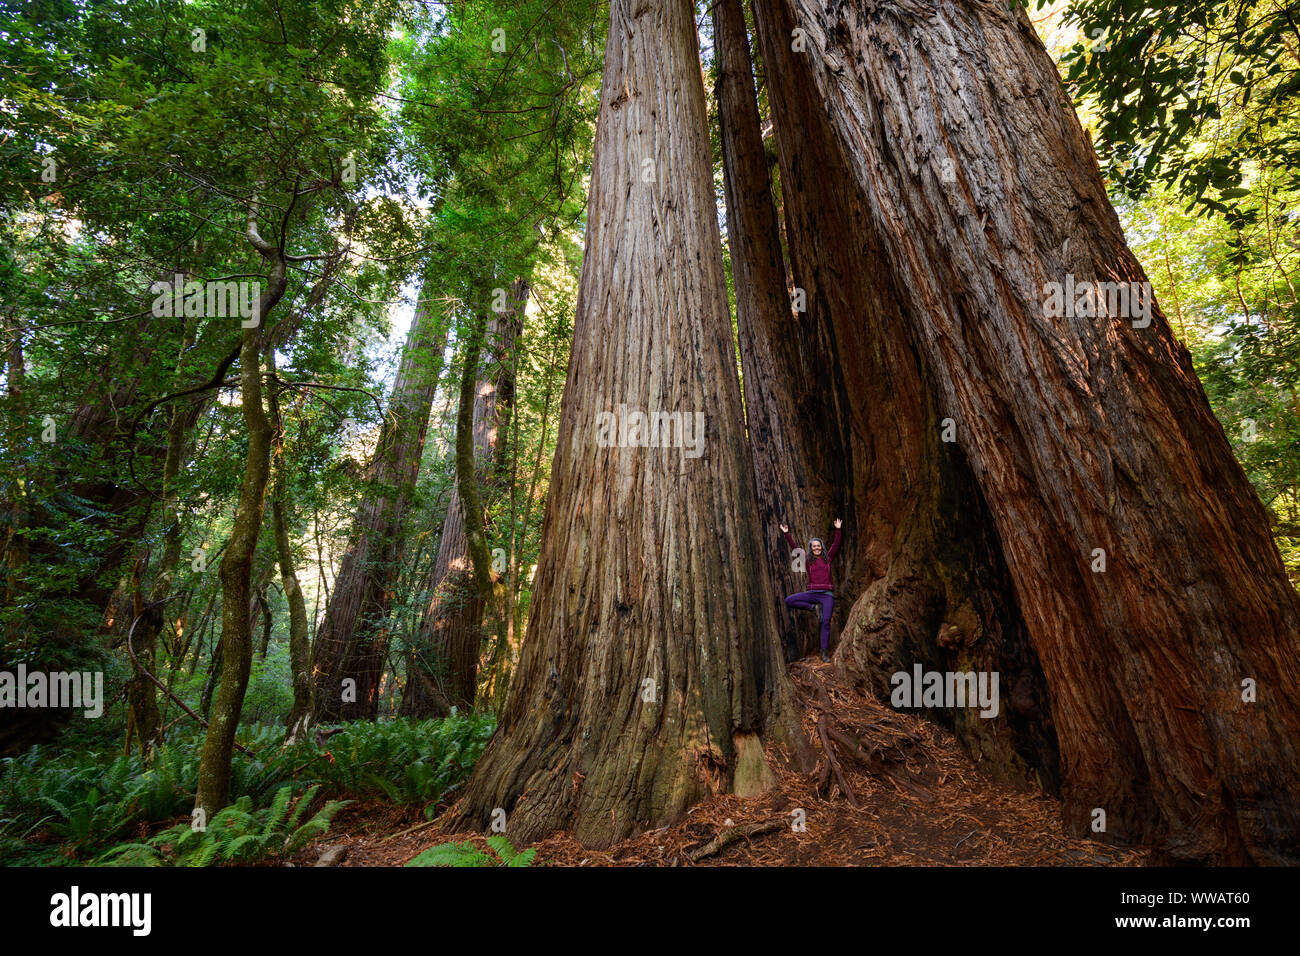 A woman doing tree yoga pose inside a giant Sequoia and redwood trees, some of the largest trees on earth, along the California Coast at the Redwoods Stock Photo